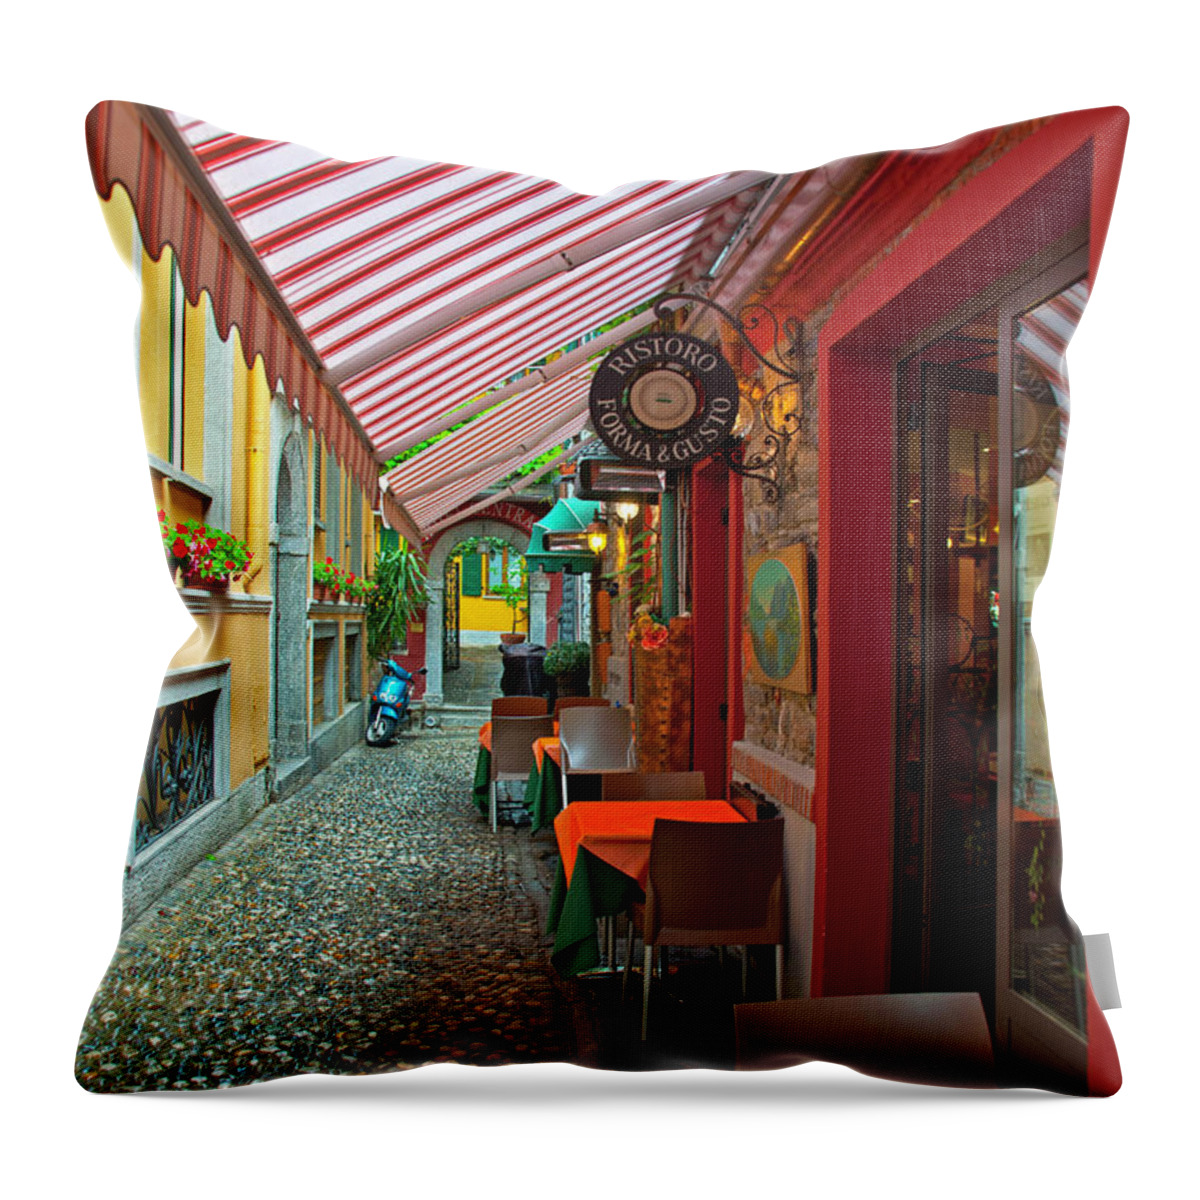 Bellagio Italy Throw Pillow featuring the photograph Under the Canopy - Lake Como, Bellagio, Italy by Denise Strahm